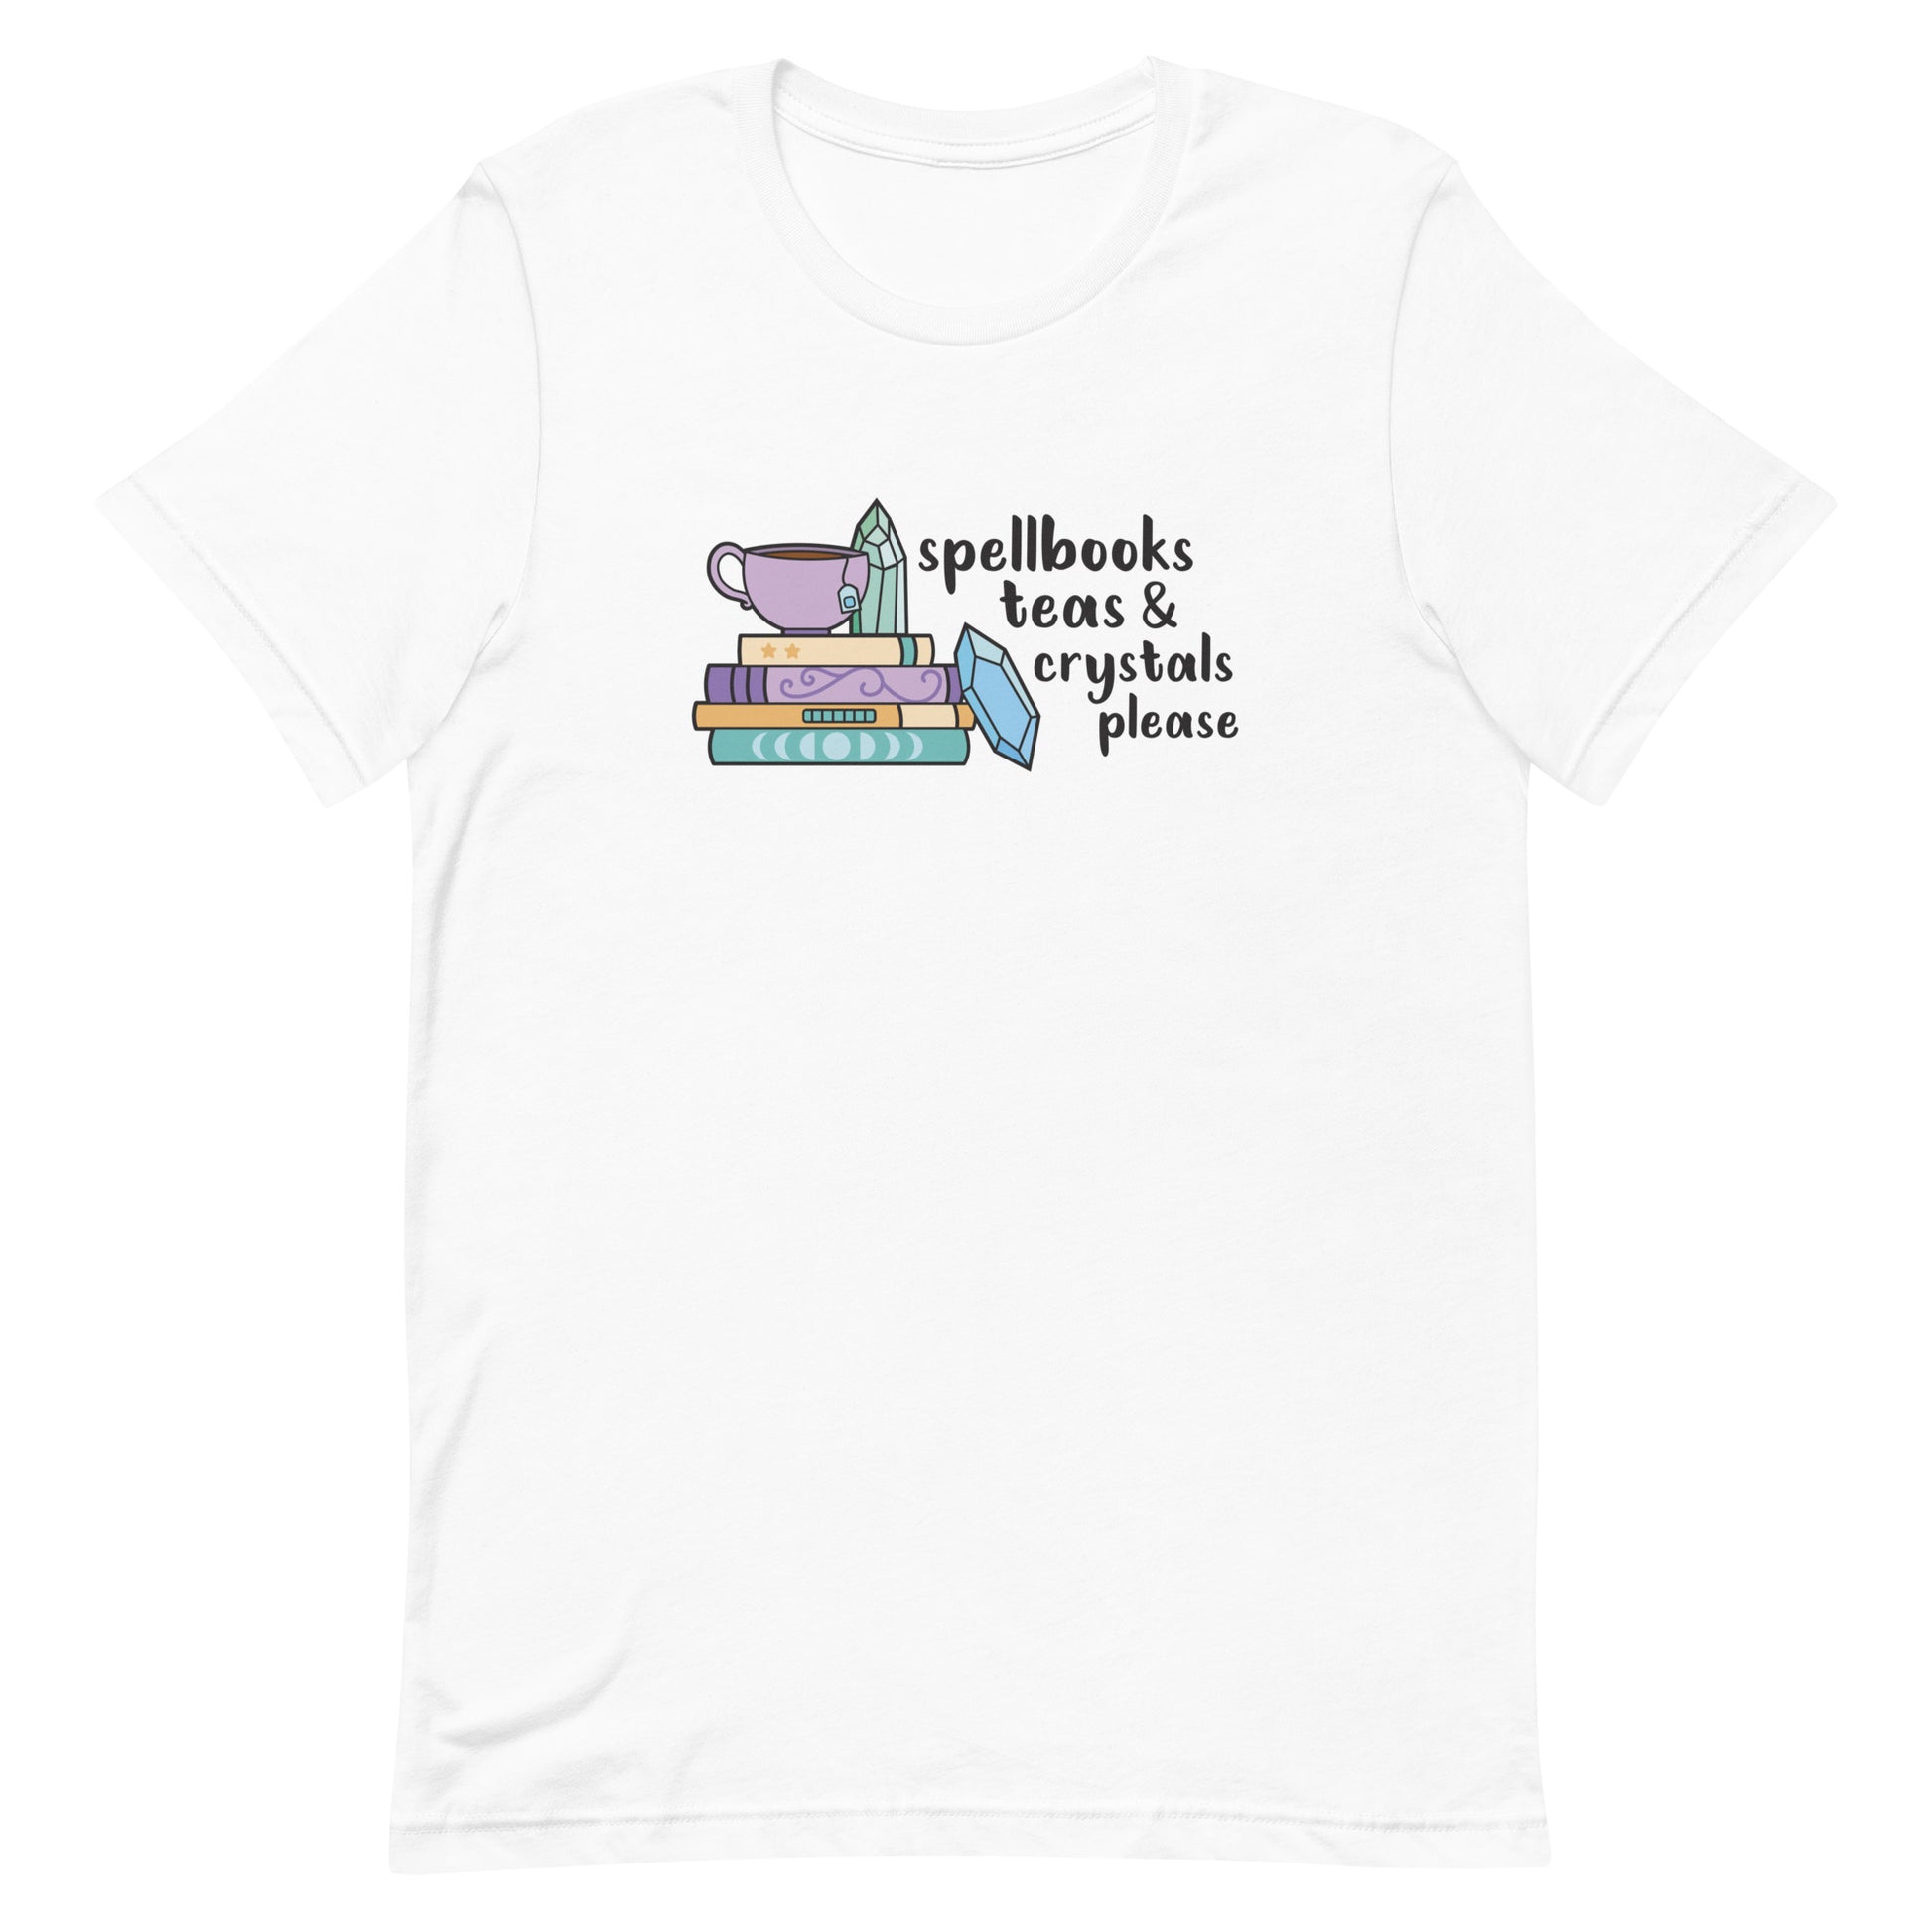 A white t-shirt featuring an illustration of a stack of spellbooks with a teacup resting on top. A few crystals are scattered around the books. Text alongside the illustration reads "Spellbooks, teas & crystals please"